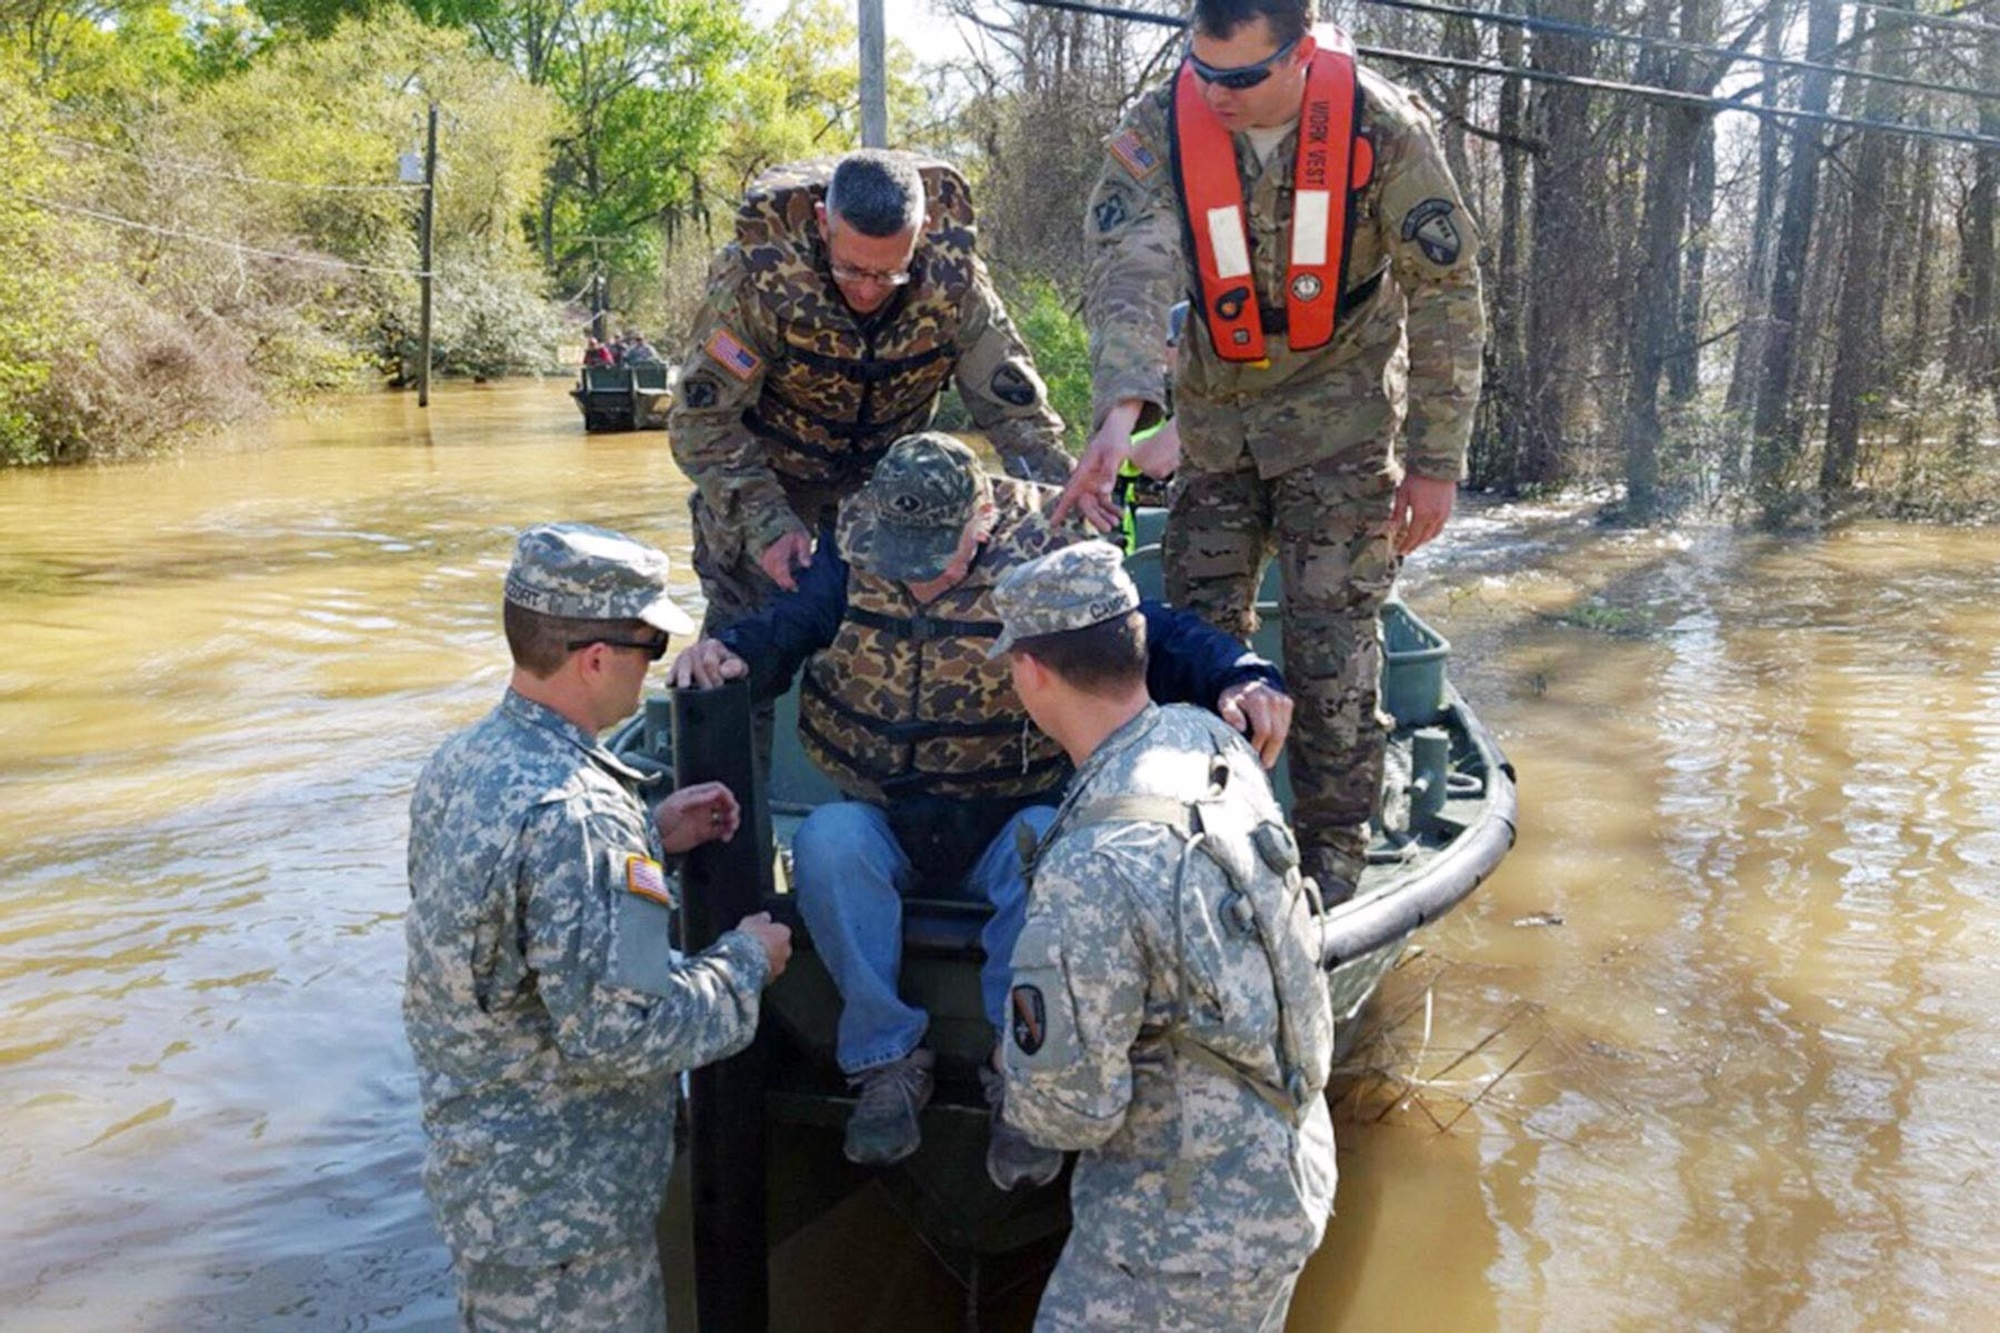 Soldiers help a flood victim from a rescue boat in Ponchatoula, La., March 13, 2016. The soldiers are assigned to the Louisiana National Guard’s 2225th Multi-Role Bridge Company, 205th Engineer Battalion. Louisiana National Guard photo by 1st Lt. Rebekah Malone